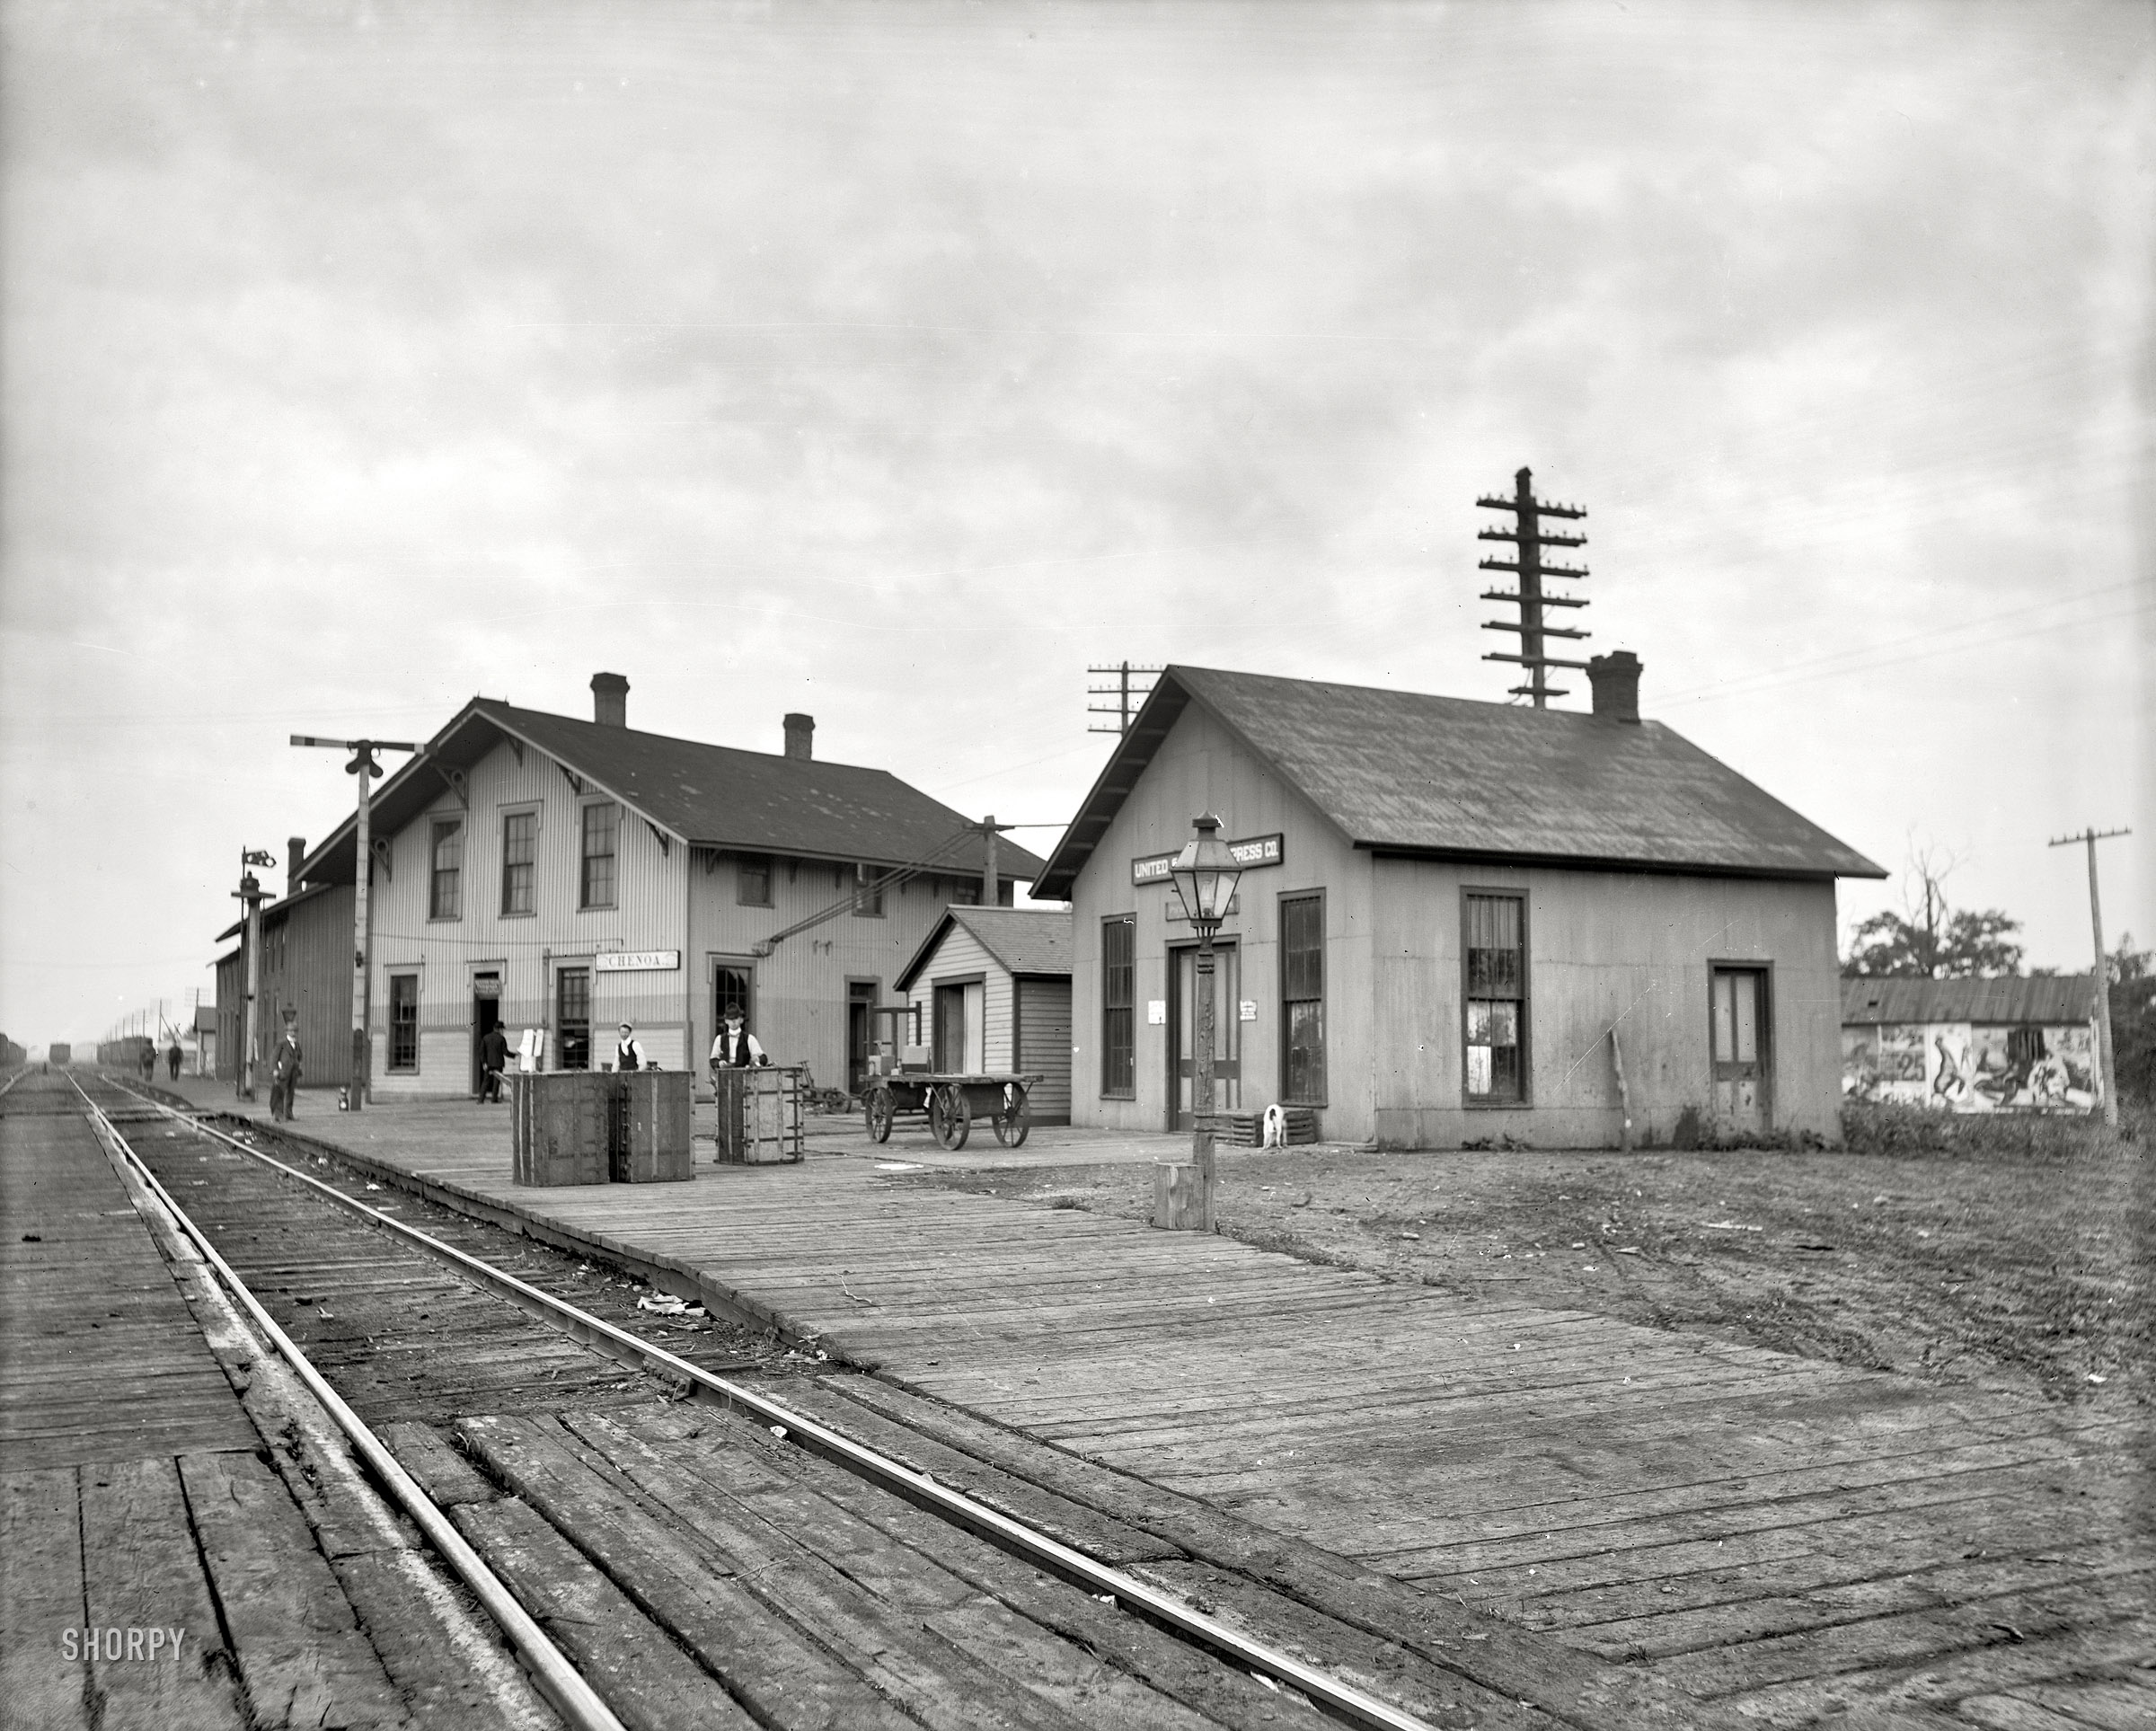 Circa 1905. "Station & buildings at Chenoa, Illinois." Plus: circus posters! 8x10 inch dry plate glass negative, Detroit Publishing Company. View full size.